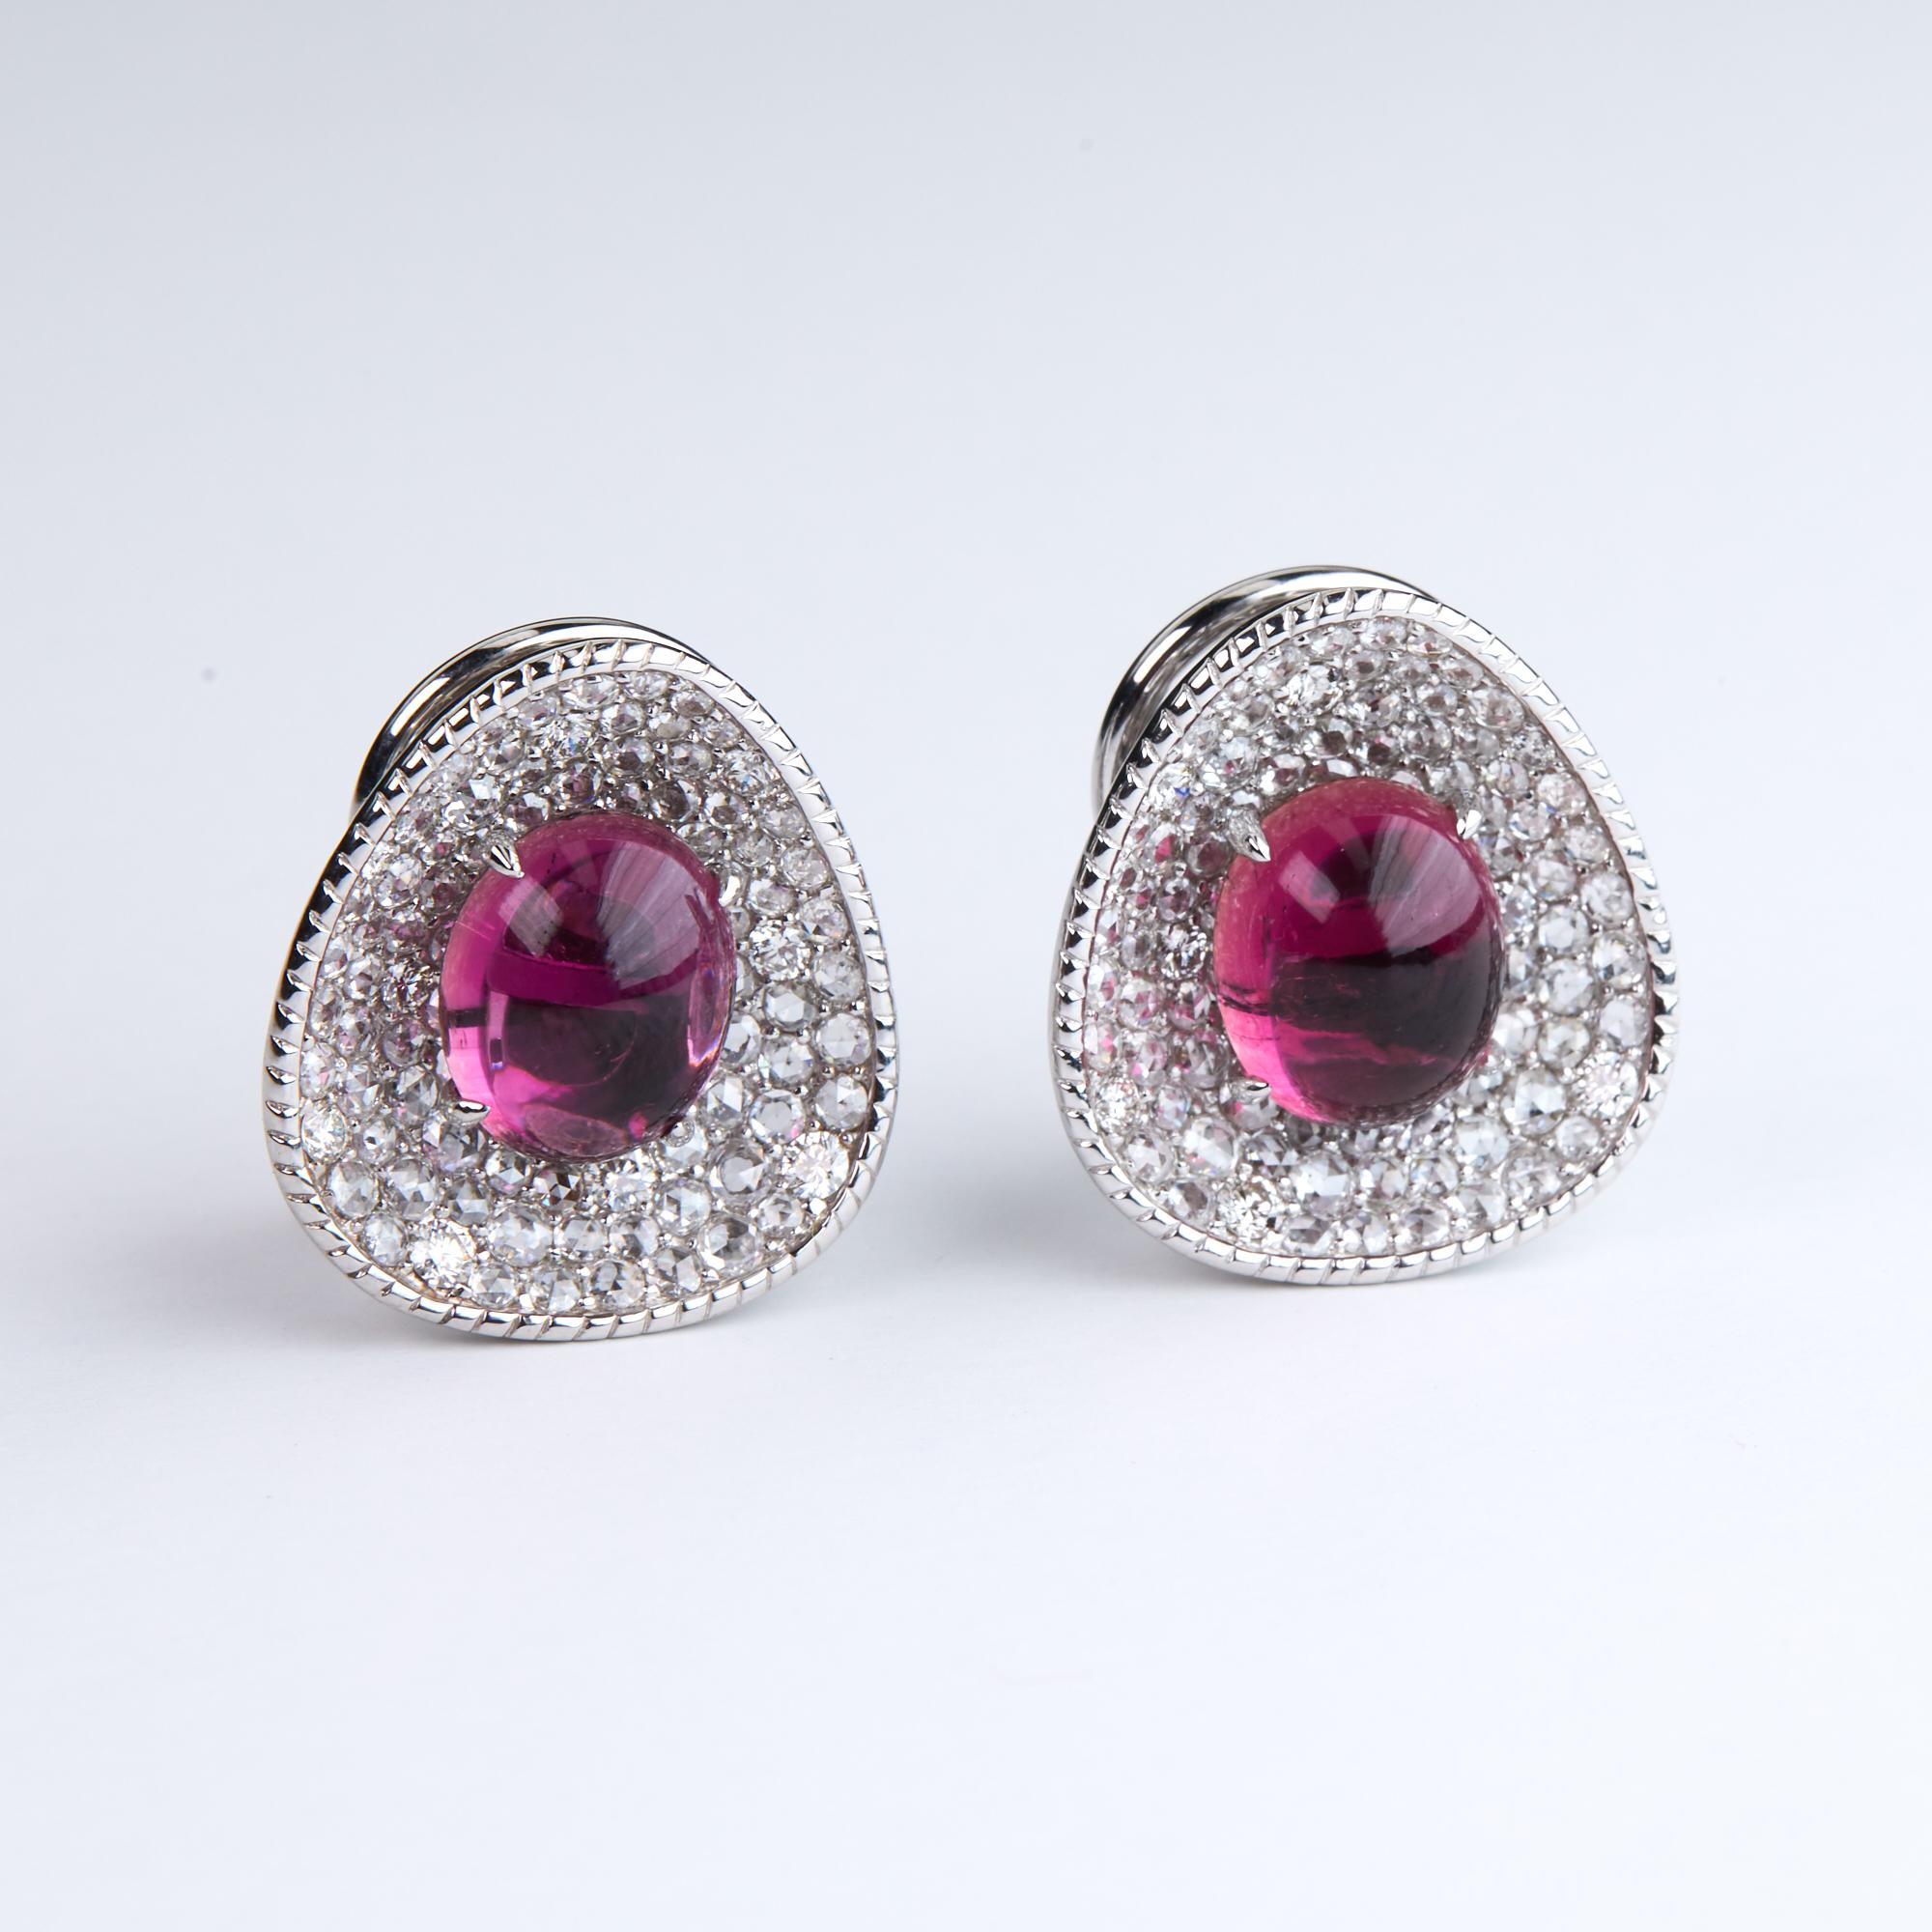 Pink Tourmaline and Diamond Earrings.  These one of a kind earrings boast 8.07 carats of Cabochon Pink Tourmaline centers sitting on a bed of rose cut diamonds (2.51 carats) and brilliant round cut diamonds (.55 carats) total weight of 3.06 carats.